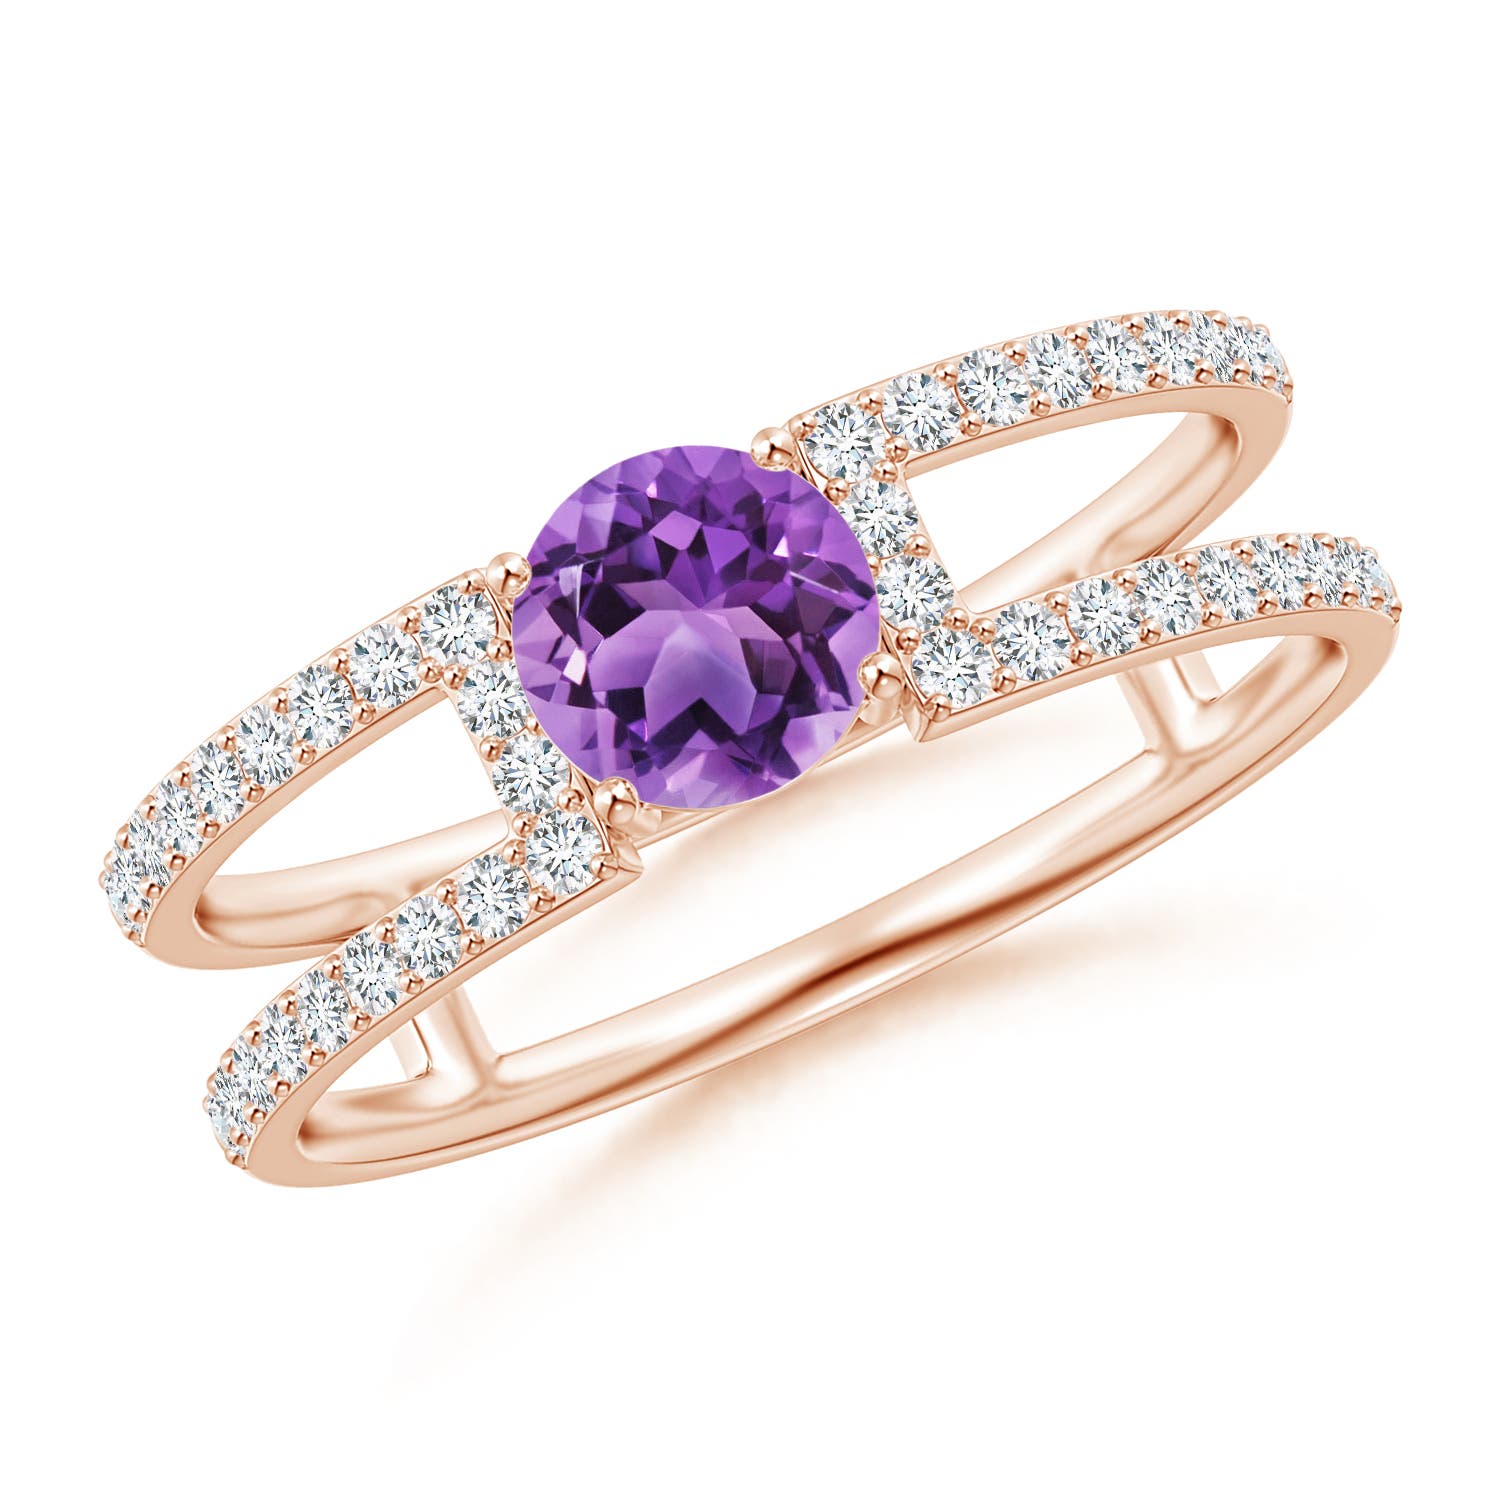 AA - Amethyst / 0.77 CT / 14 KT Rose Gold